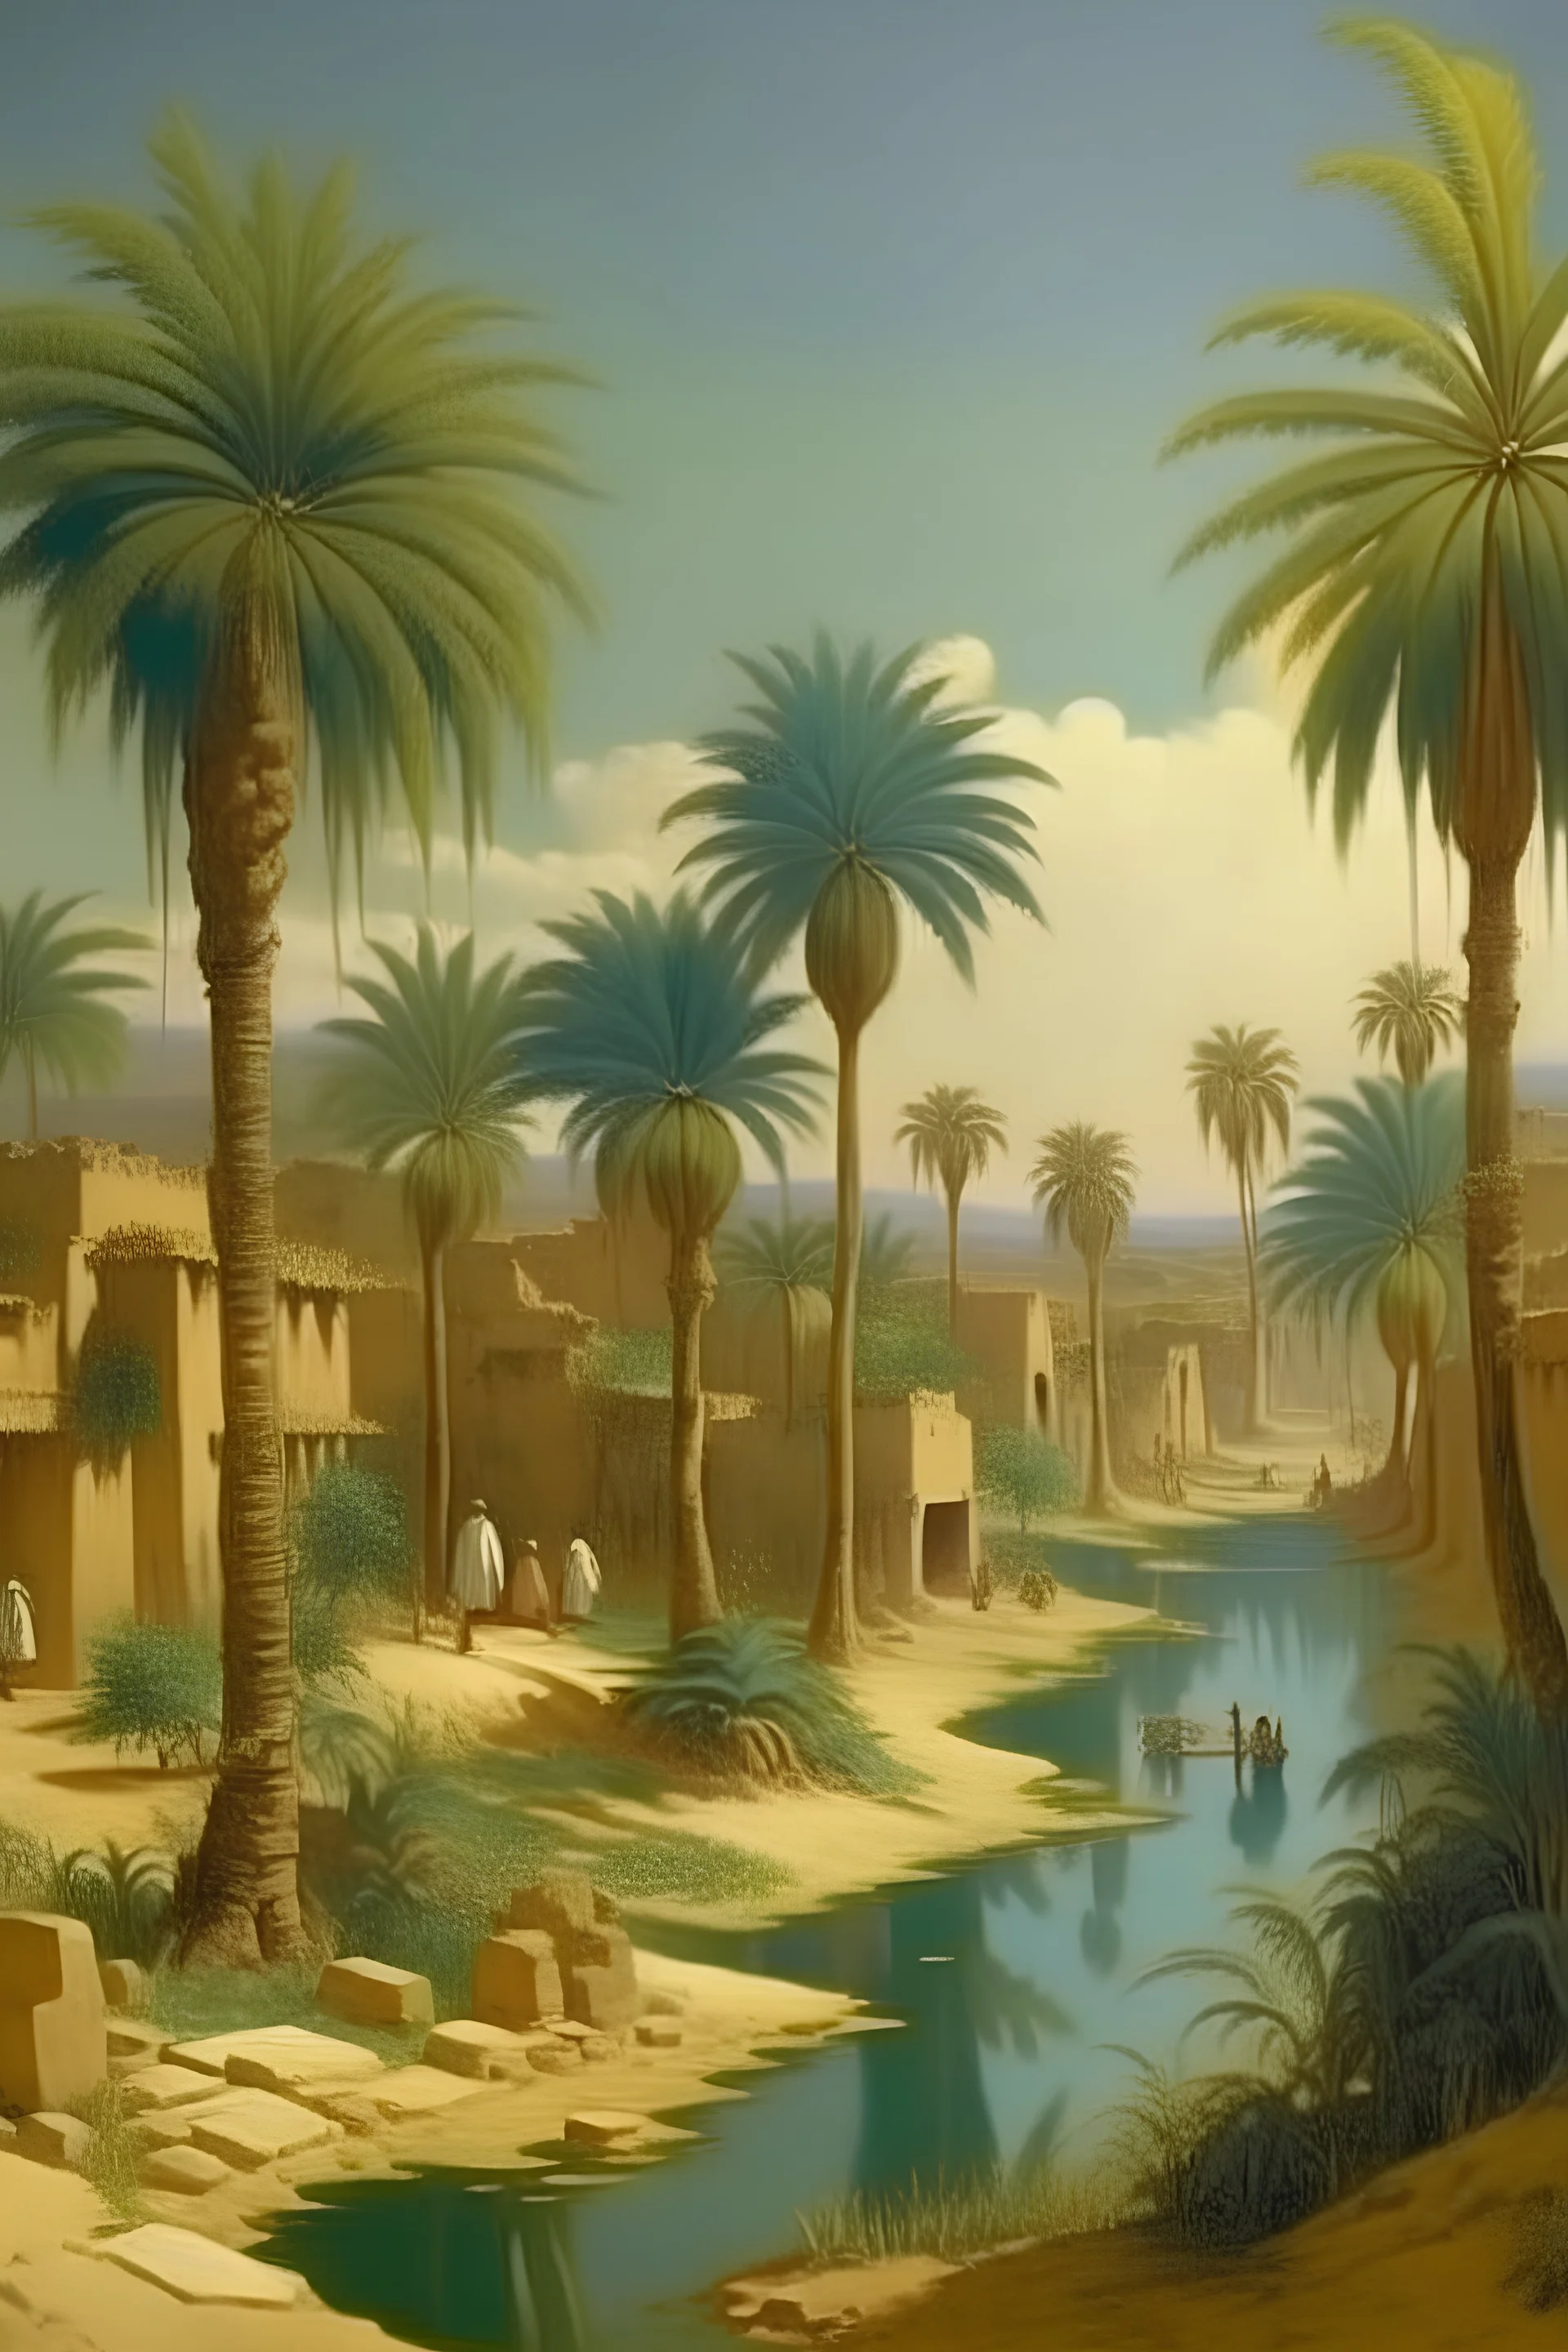 Portrait of an old egyptian avillage include plants trees palm trees and corn fields canals